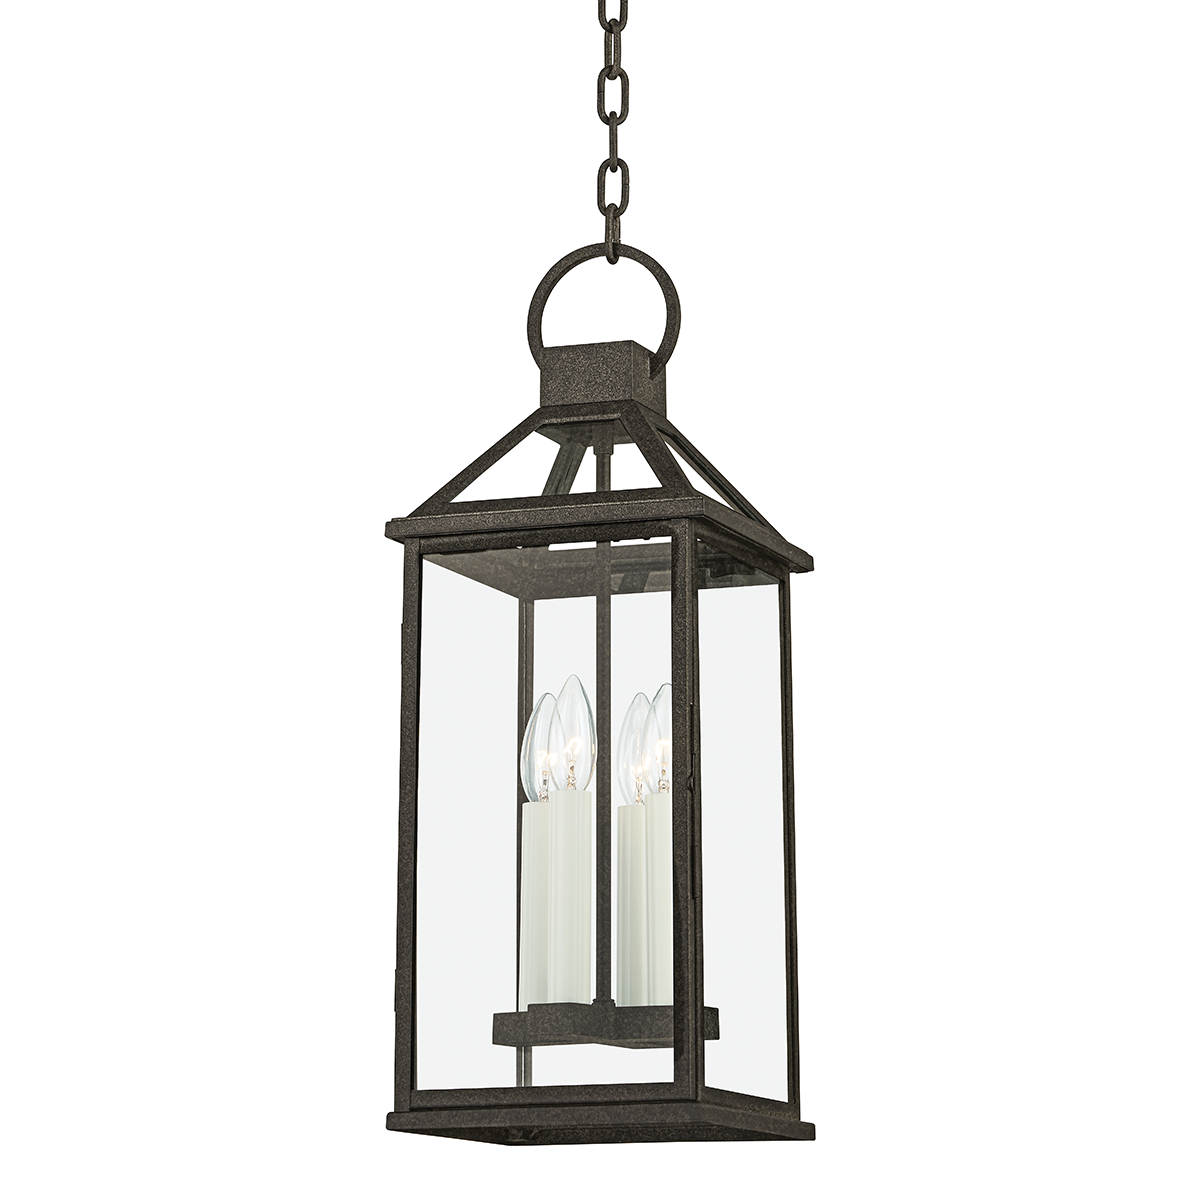 Troy Lighting 4 LIGHT LARGE EXTERIOR LANTERN F2749 Outdoor l Wall Troy Lighting FRENCH IRON  